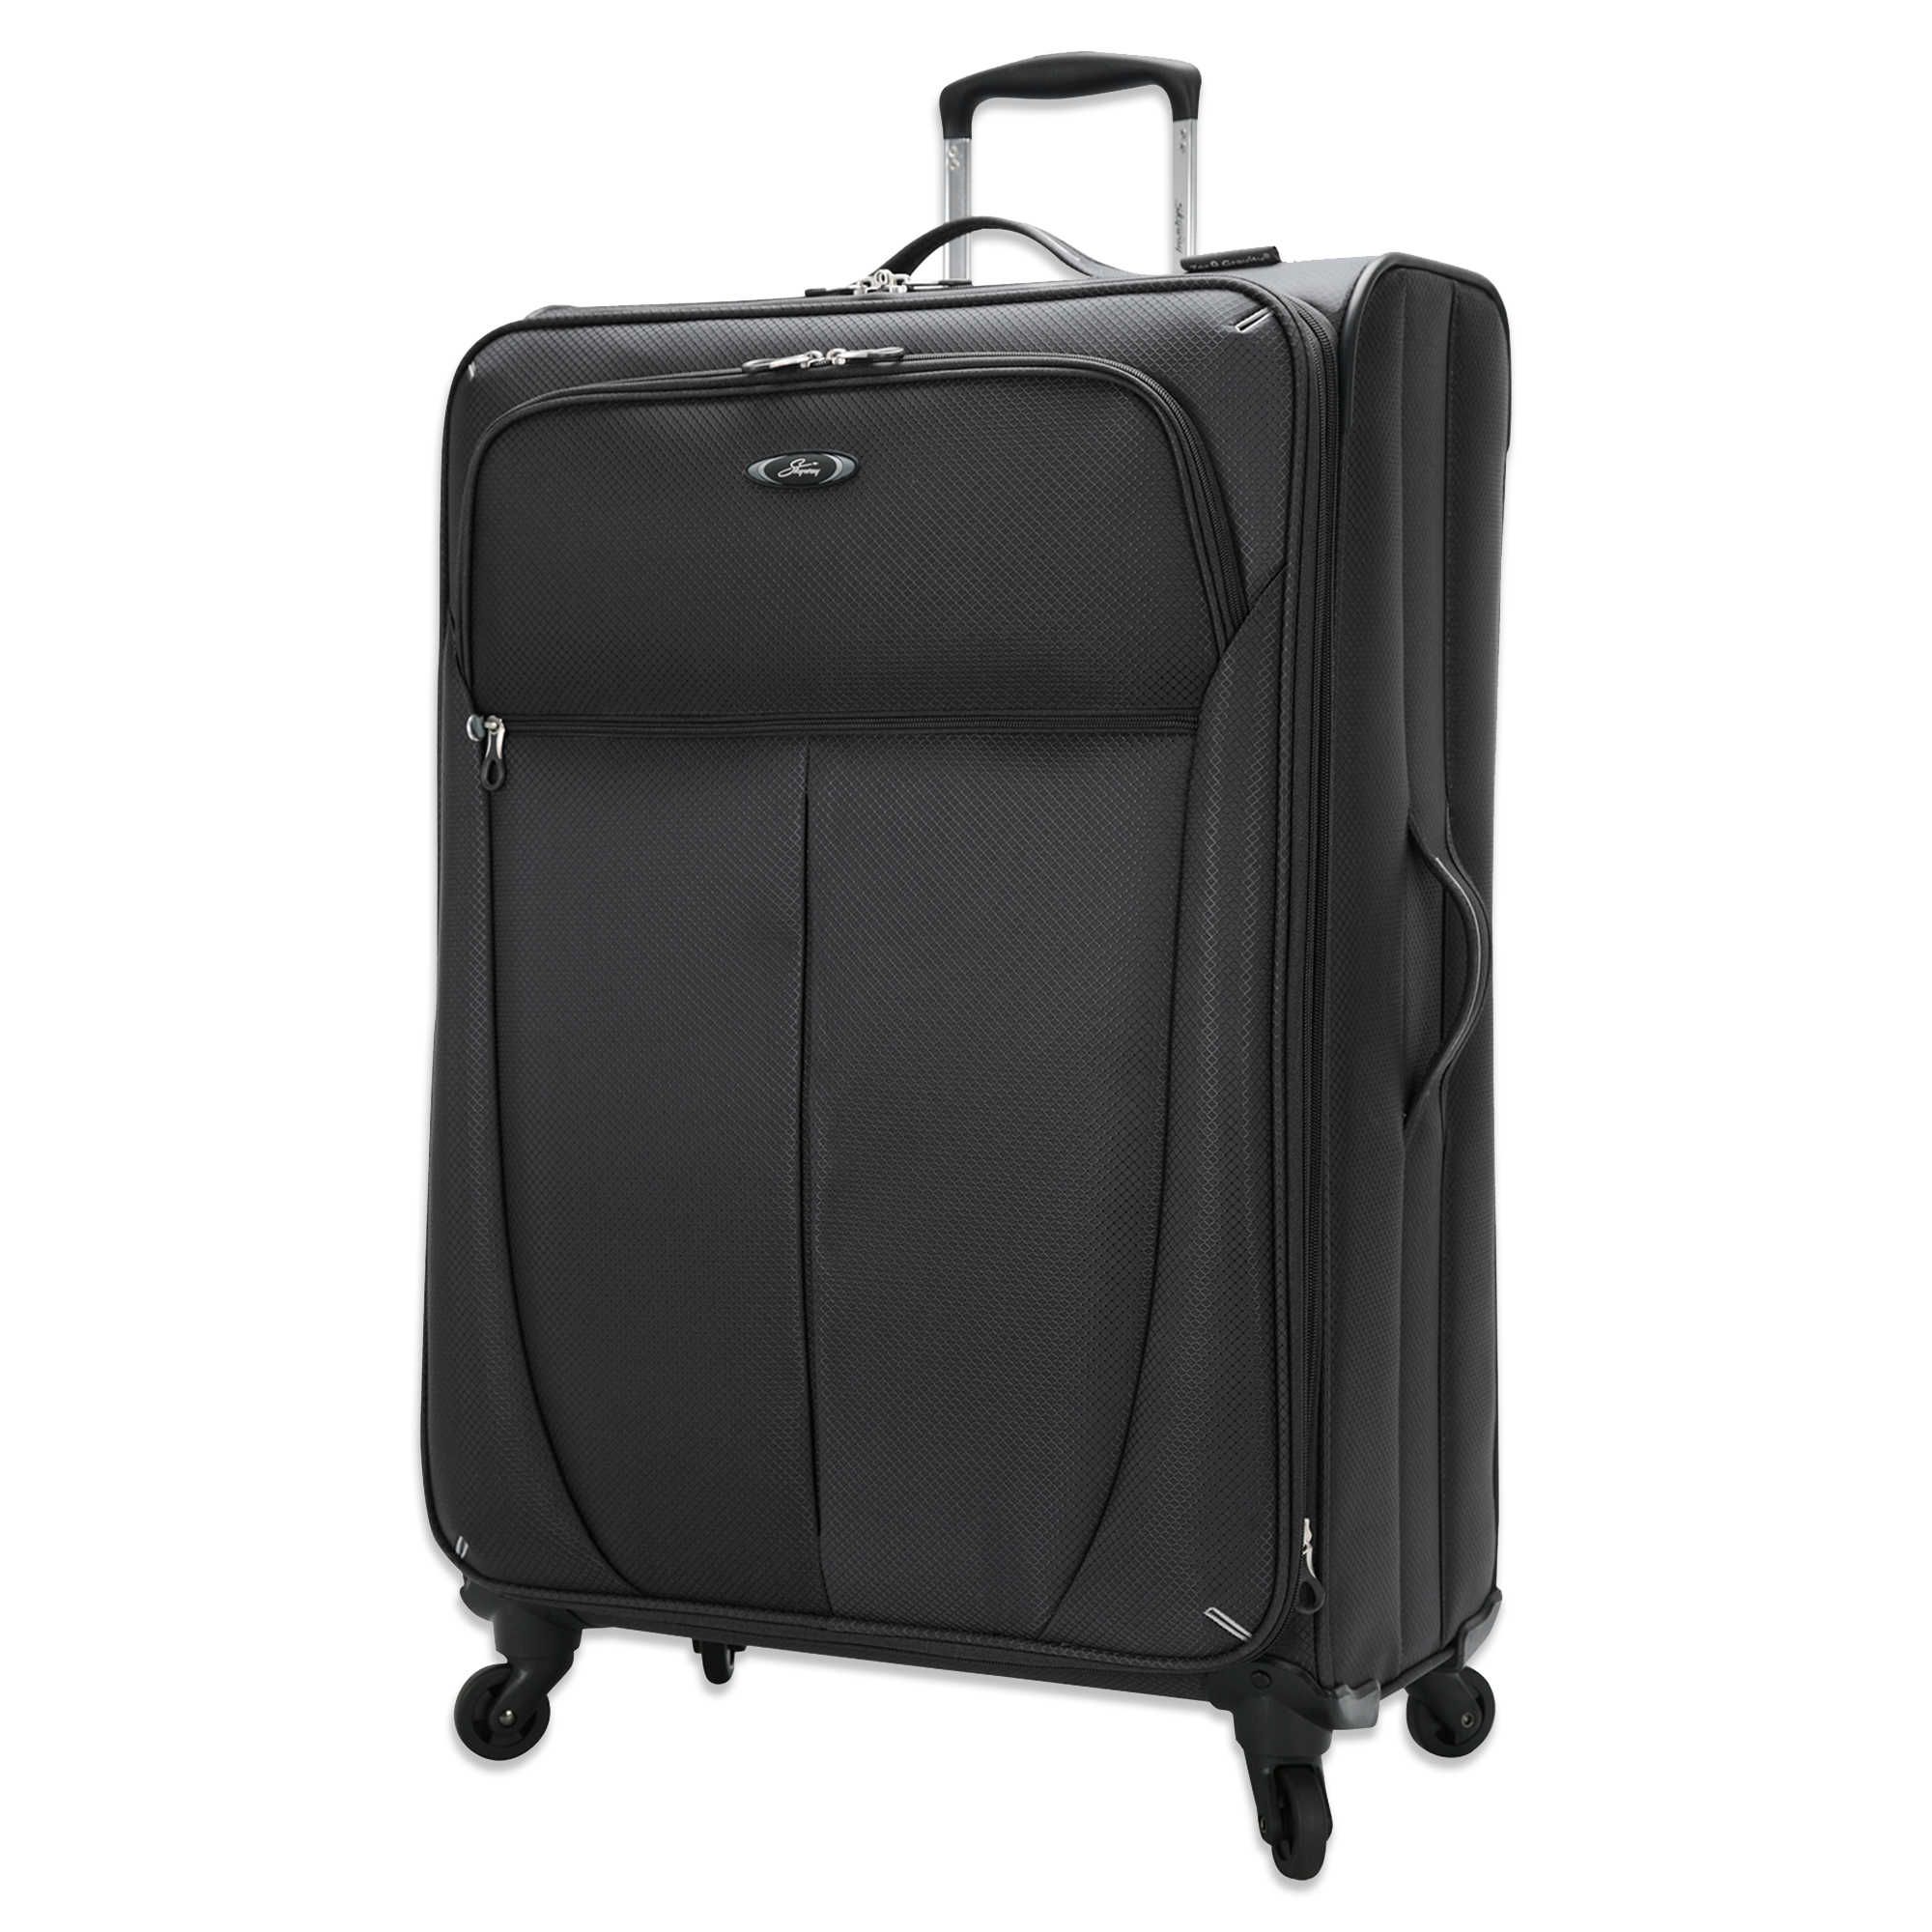 the-10-best-lightweight-luggage-items-to-buy-in-2018